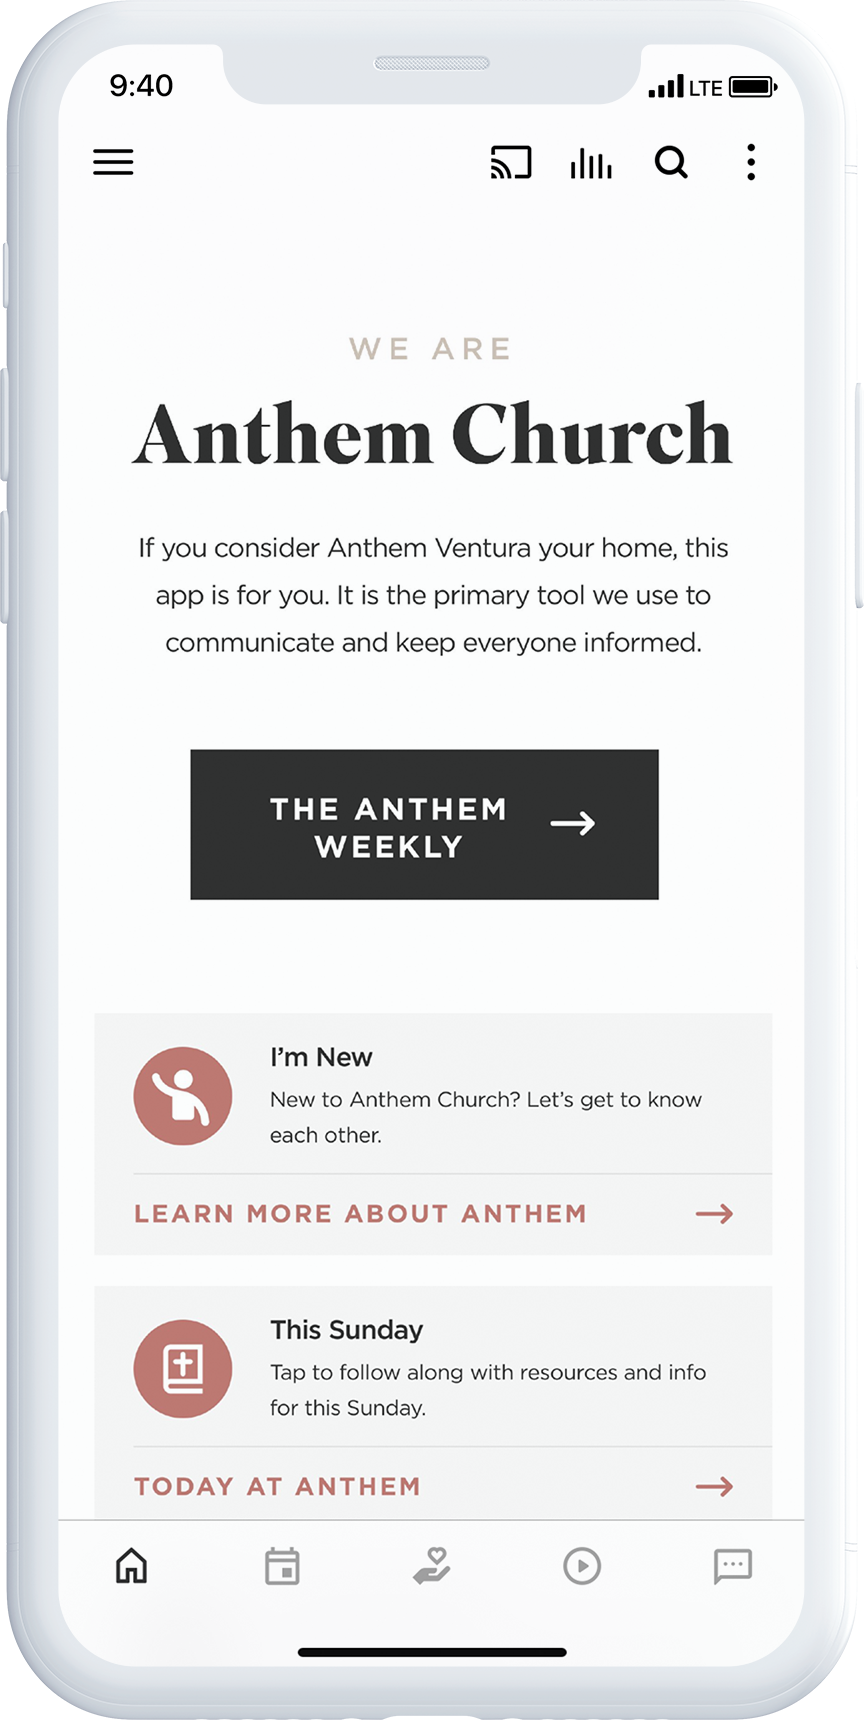 Engagement platform for the church